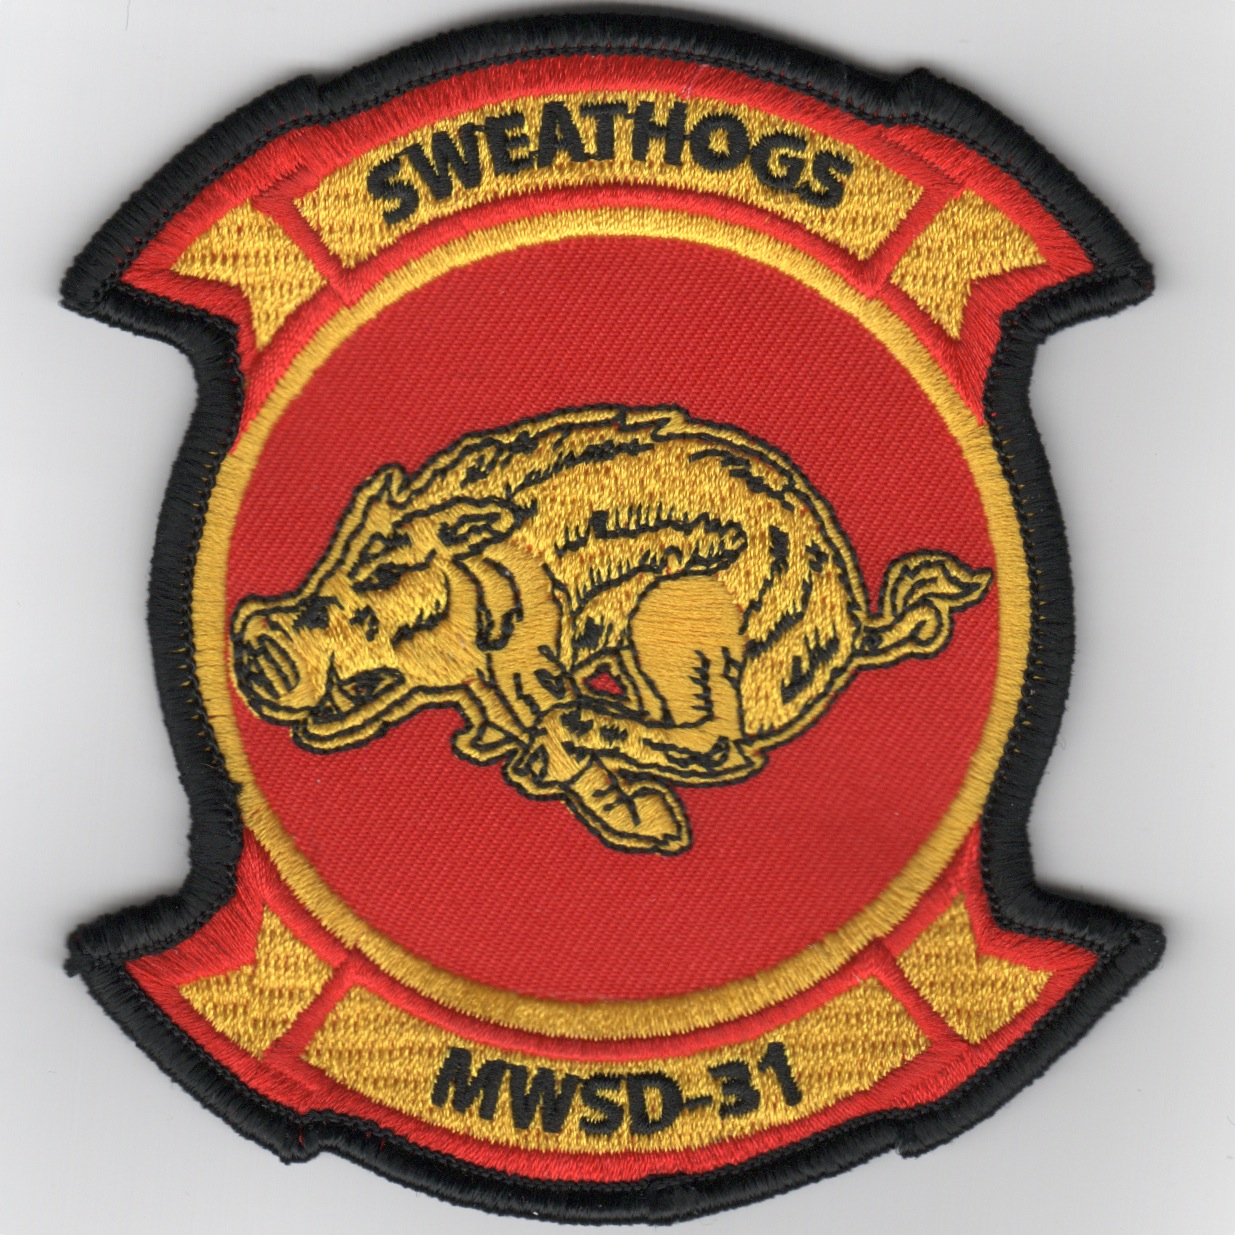 MAG-31/MWSD-31 Squadron Patch (Red)